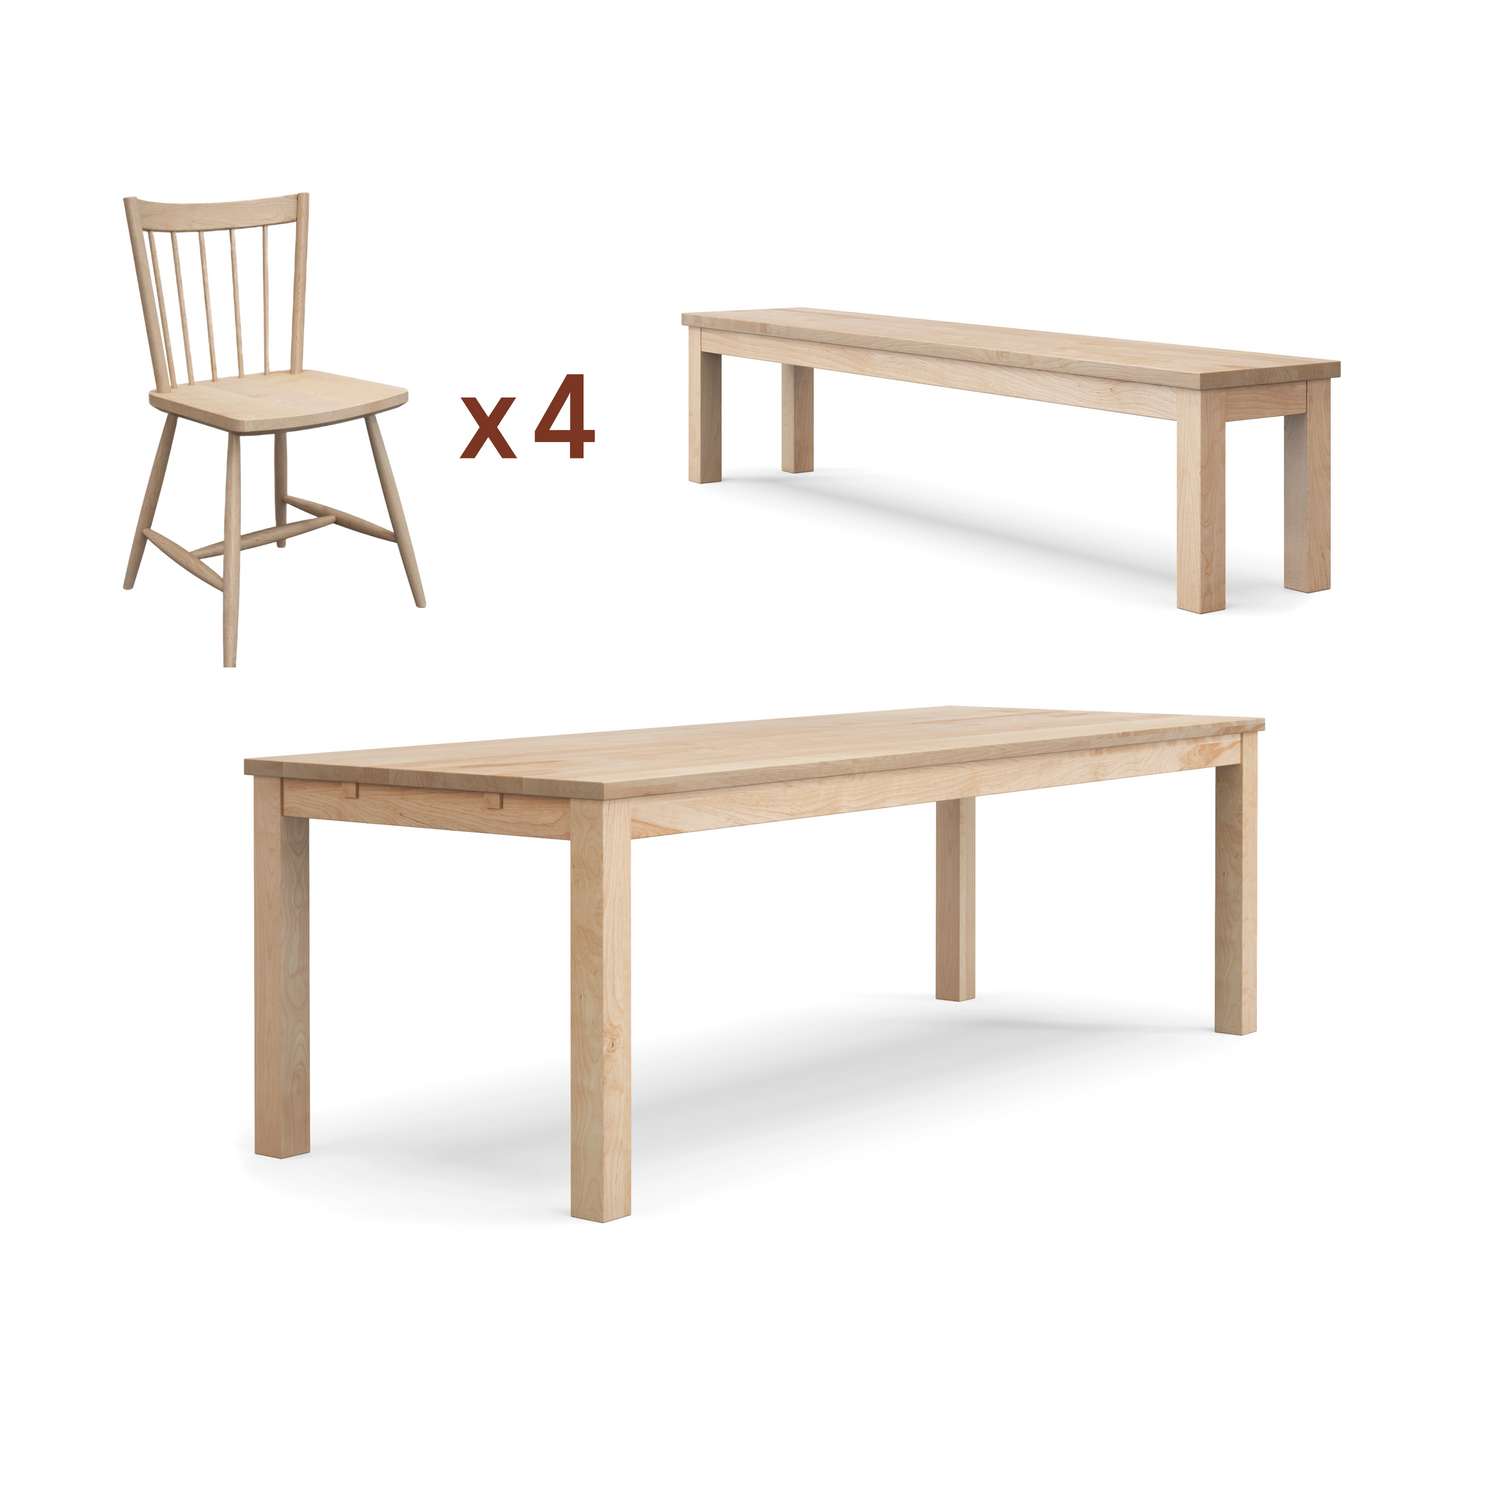 Classic table + bench and chaise Bundle